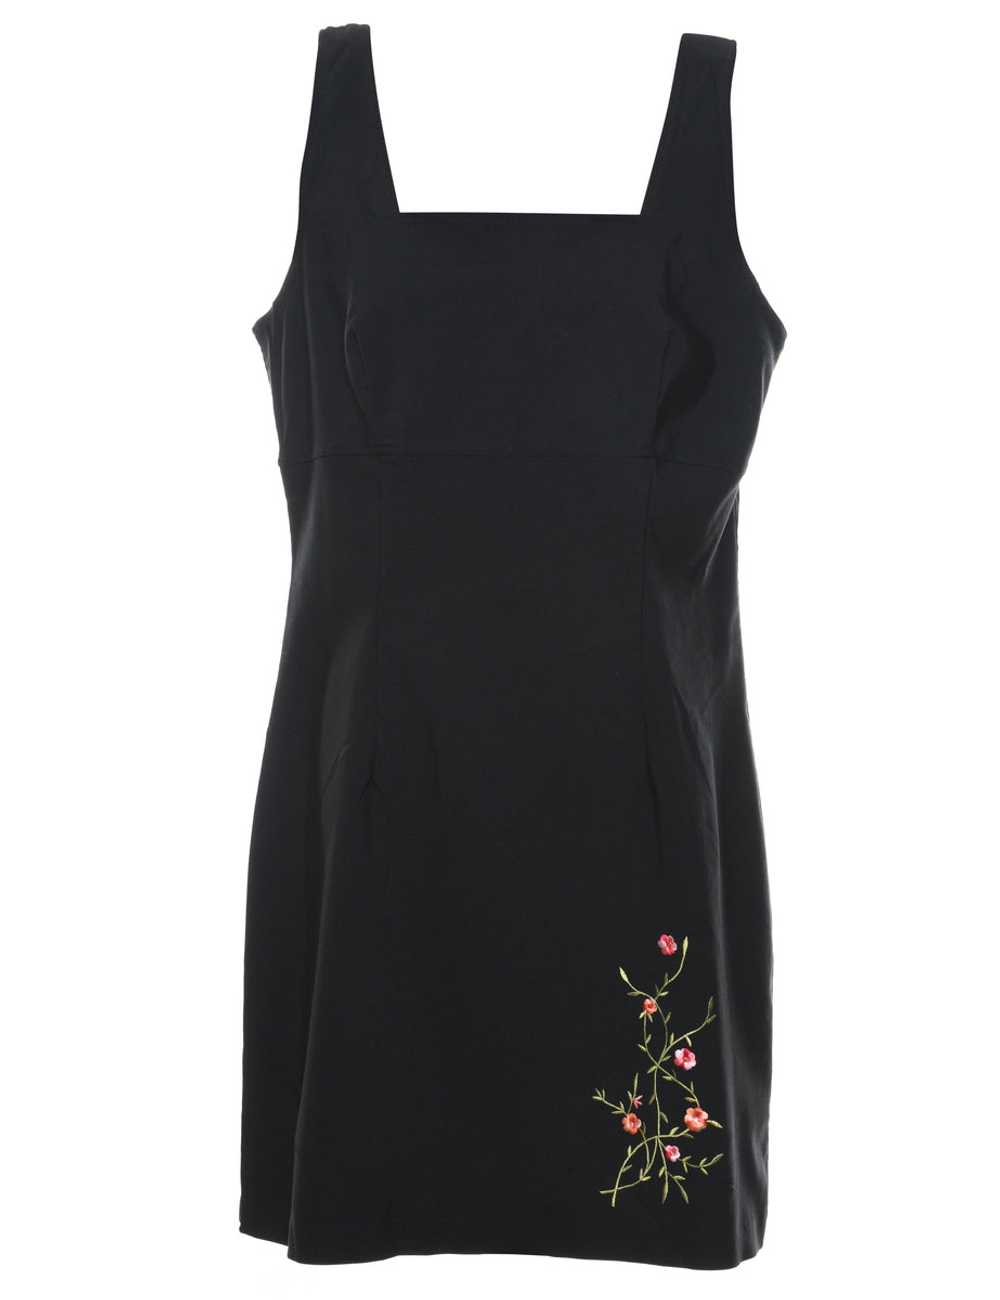 Floral Pattern Embroidered Mini Dress - L - image 1